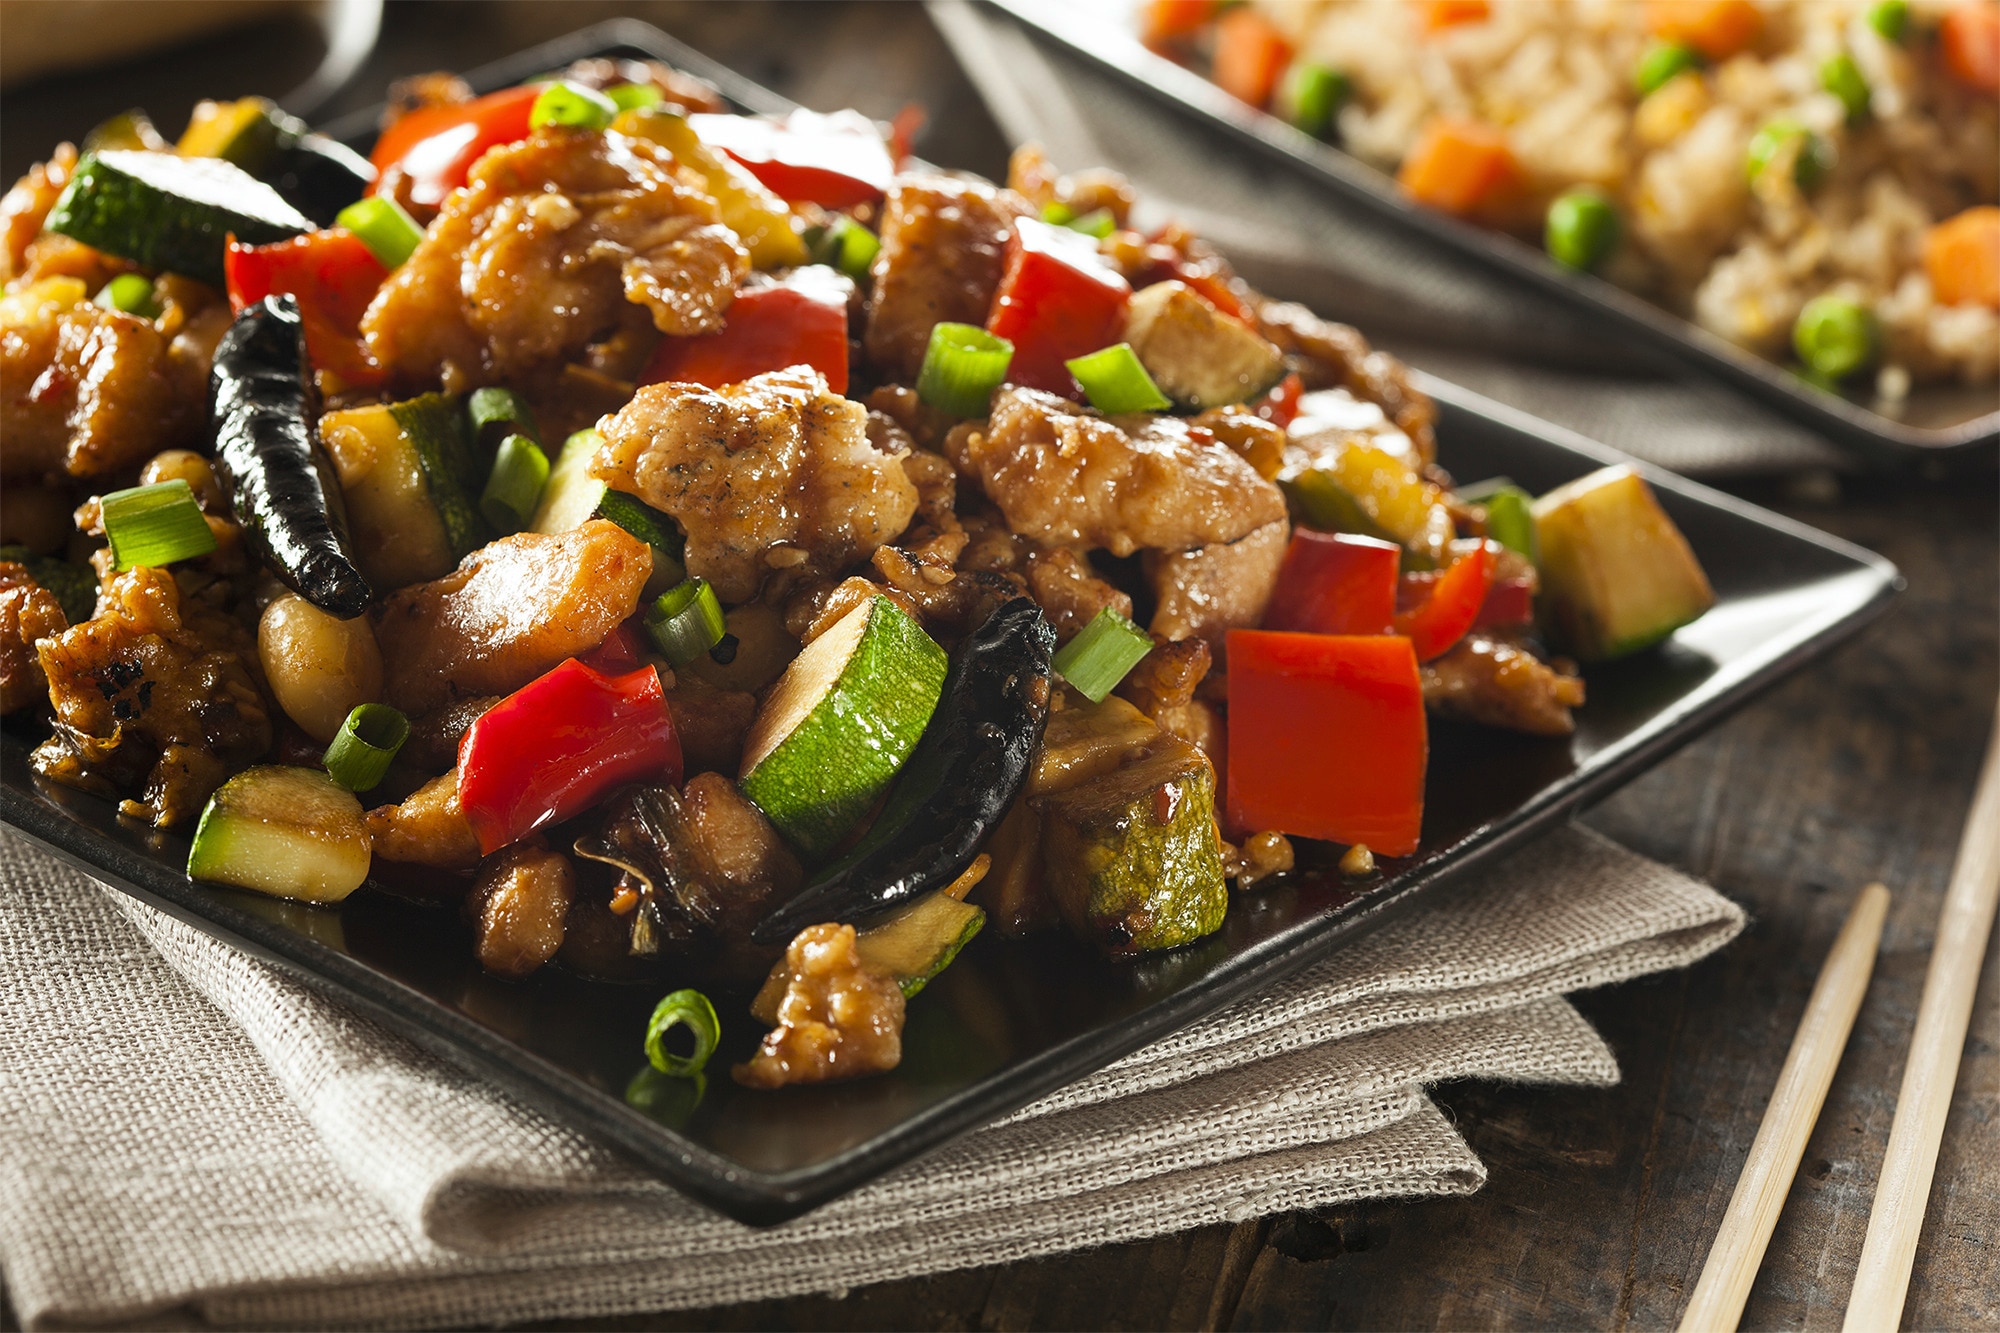 A plate of kung pao chicken with bell peppers, zucchini, and chilies